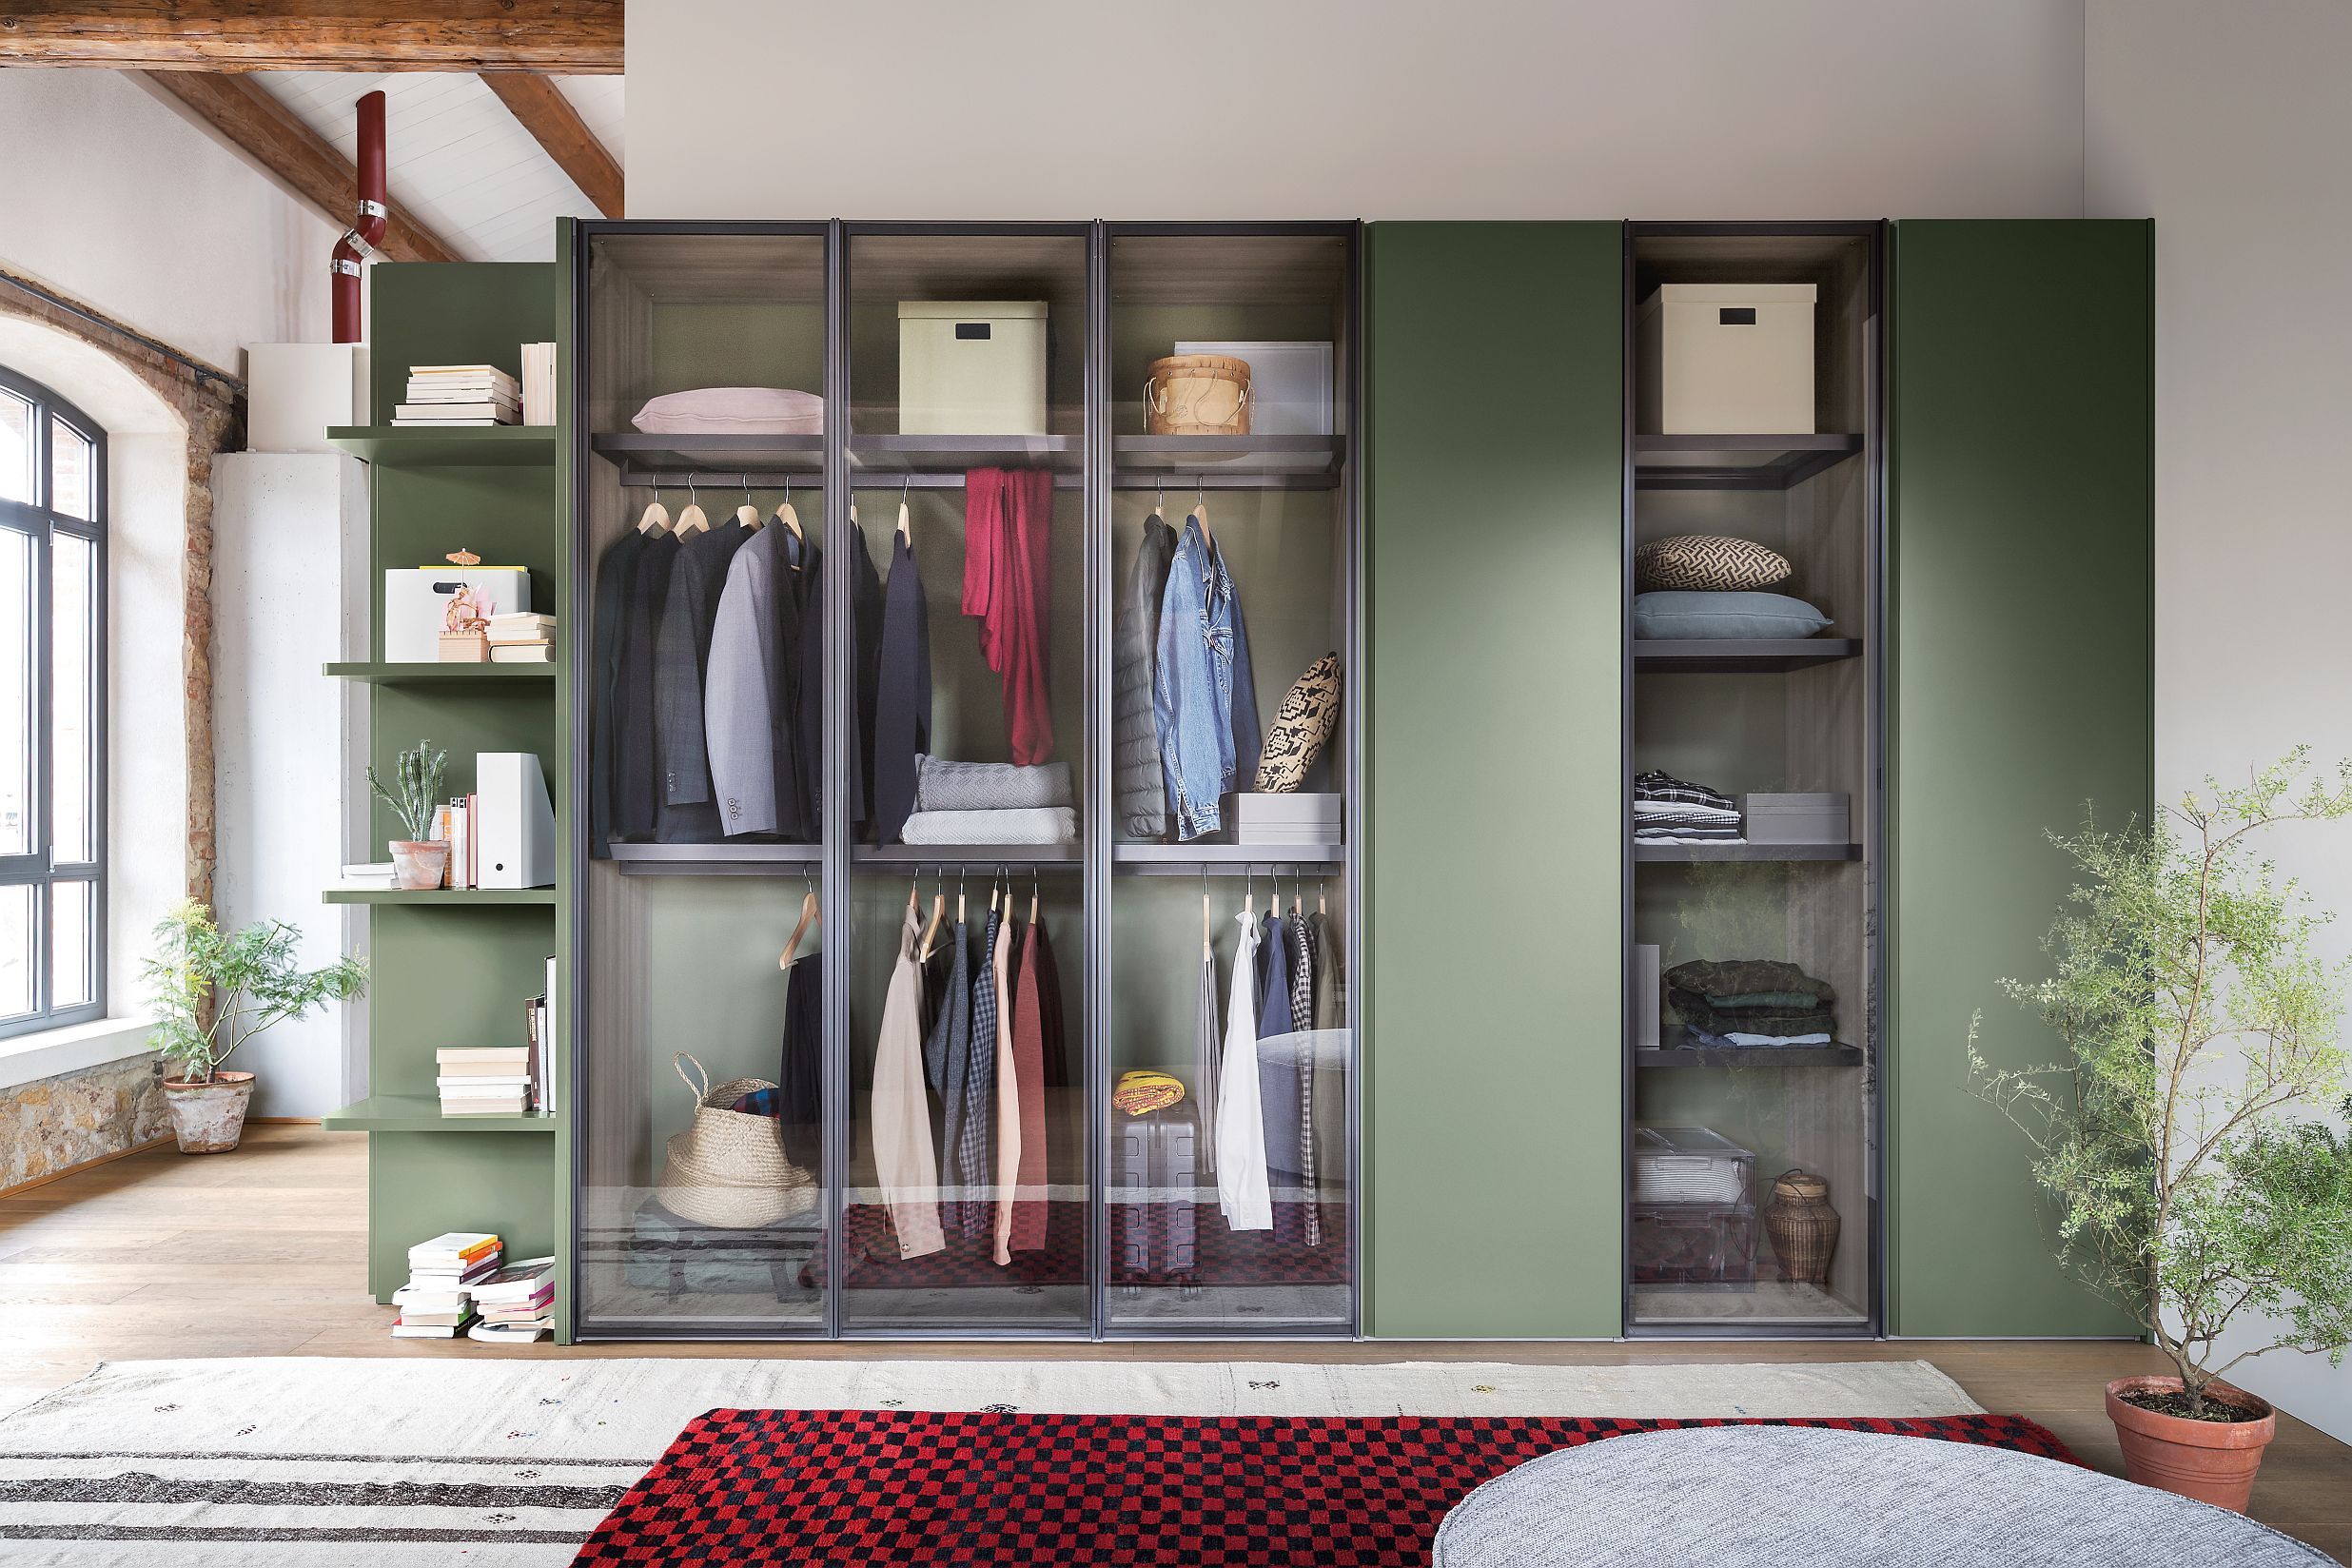 15 Fabulous Built In Wardrobe Ideas For All Interior Styles | Real Homes For Built In Wardrobes (Photo 7 of 15)